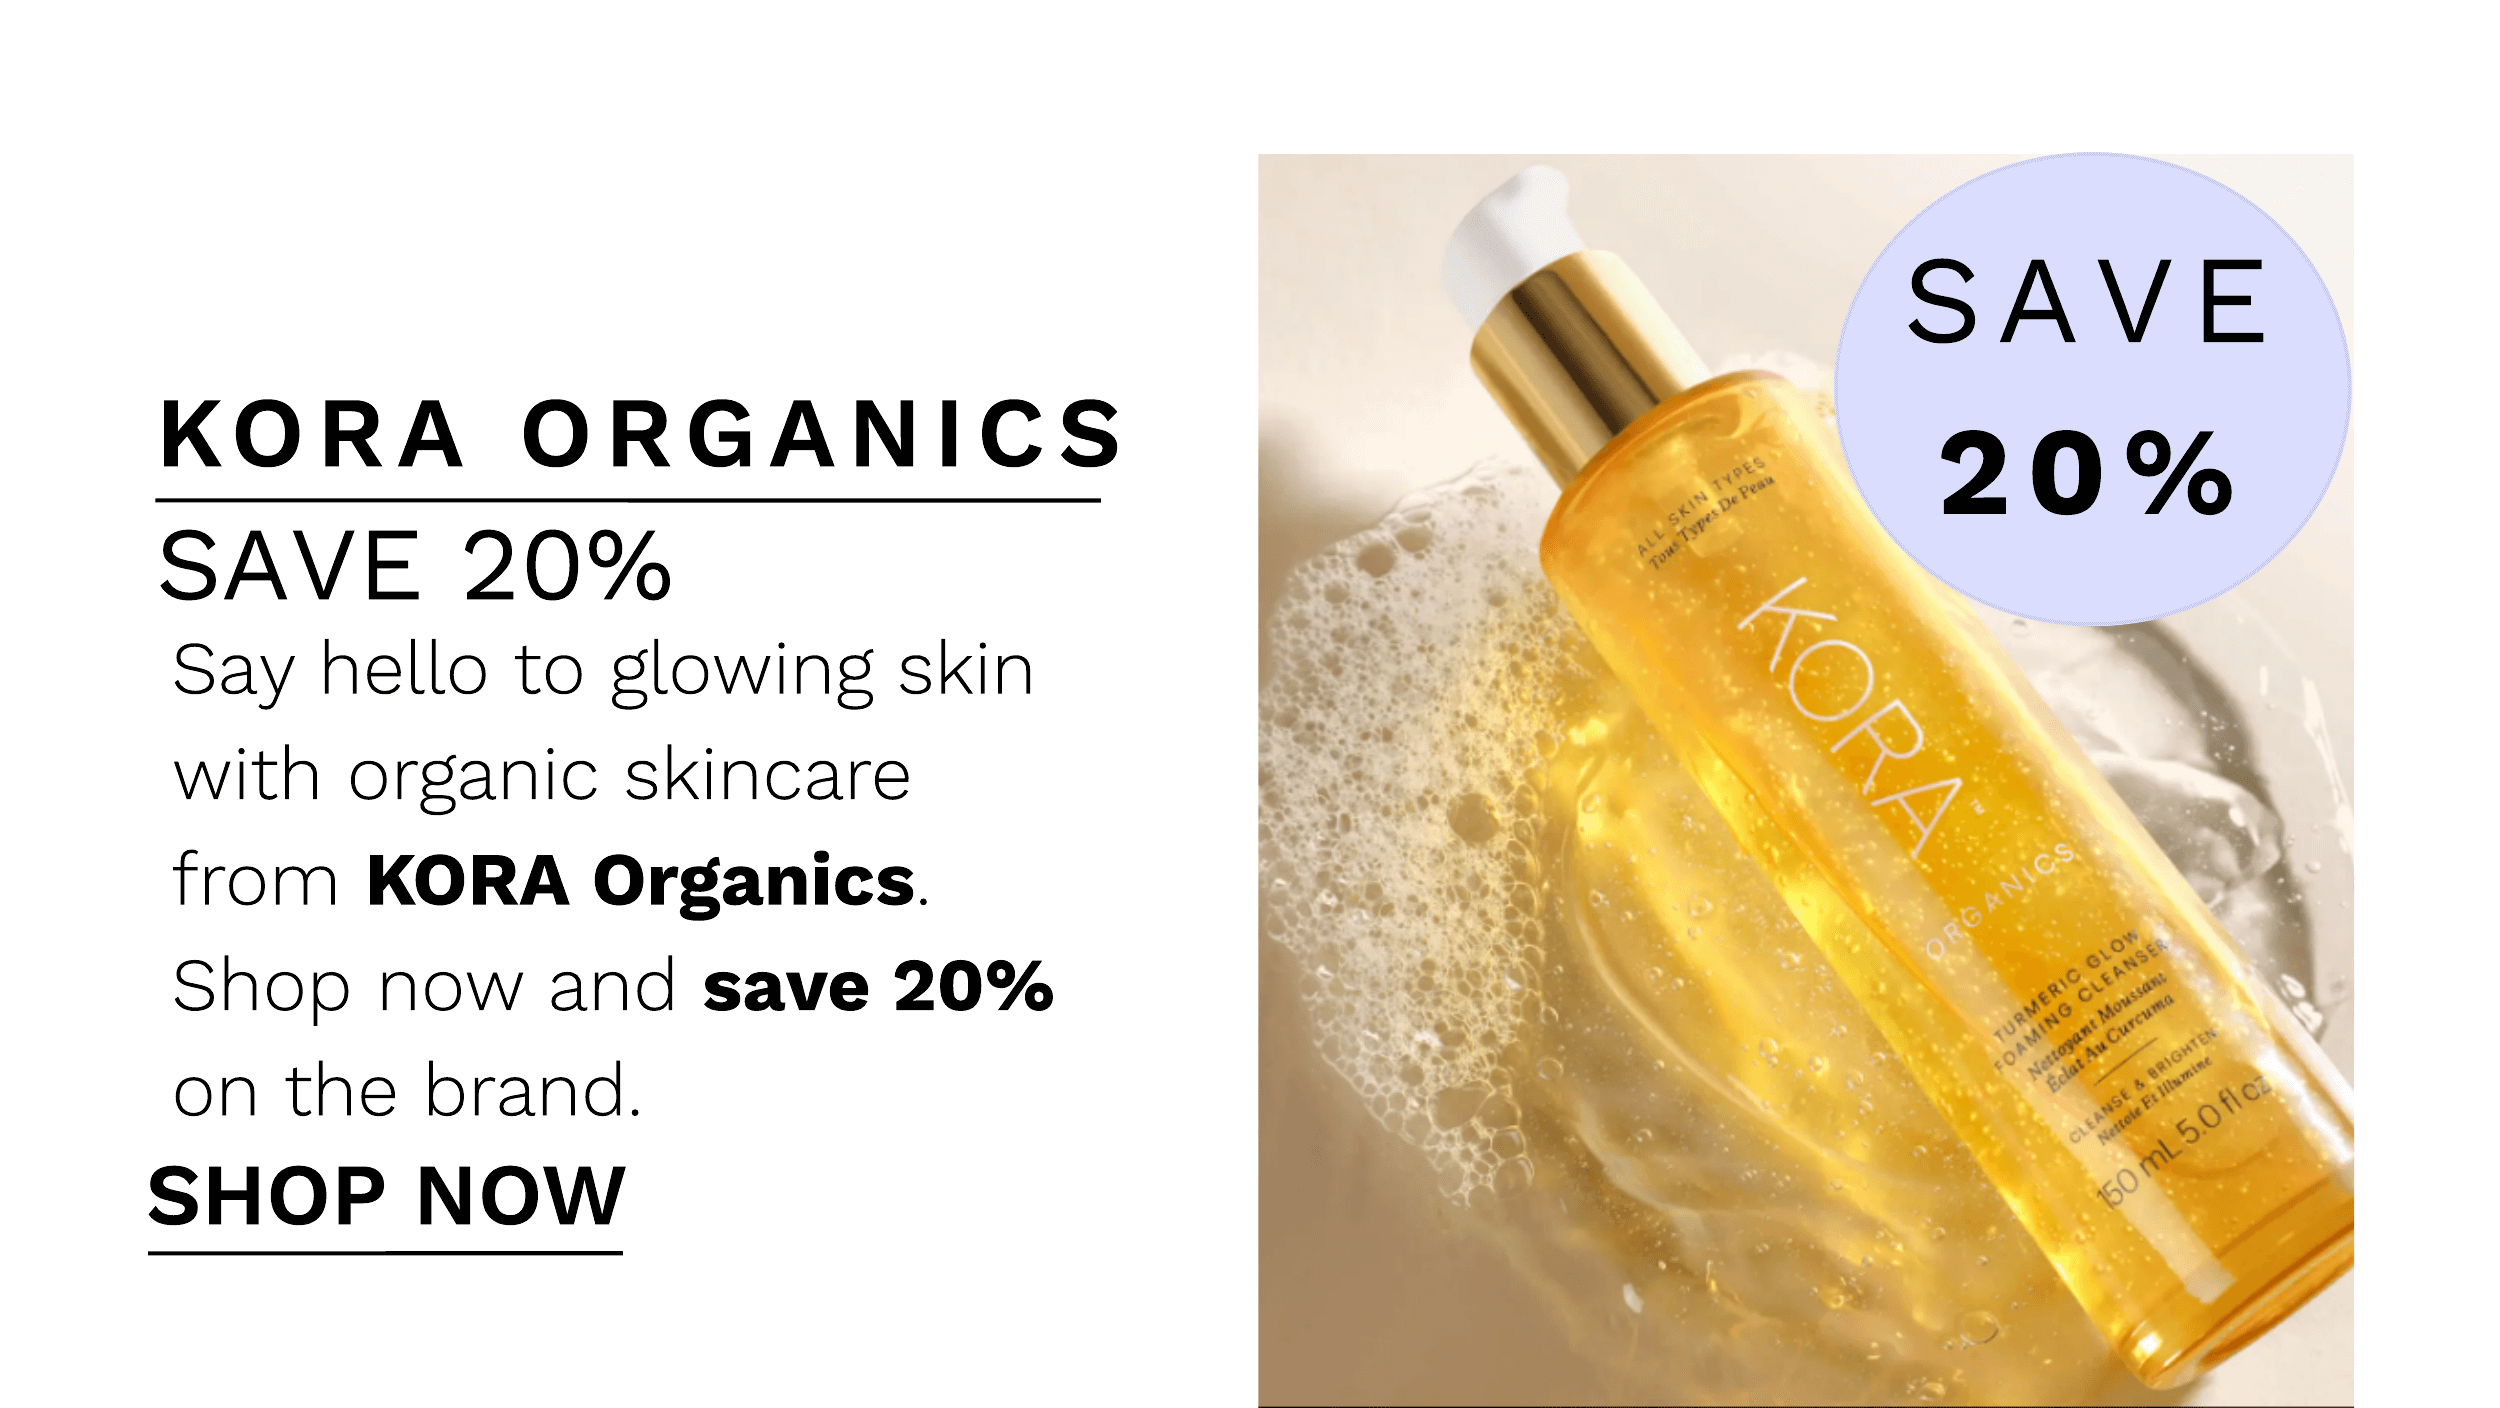 KORA ORGANICS SAVE 20% Say hello to glowing skin with organic skincare frorm KORA Organics. Shop now and save 20% on the brand. SHOP NOW 